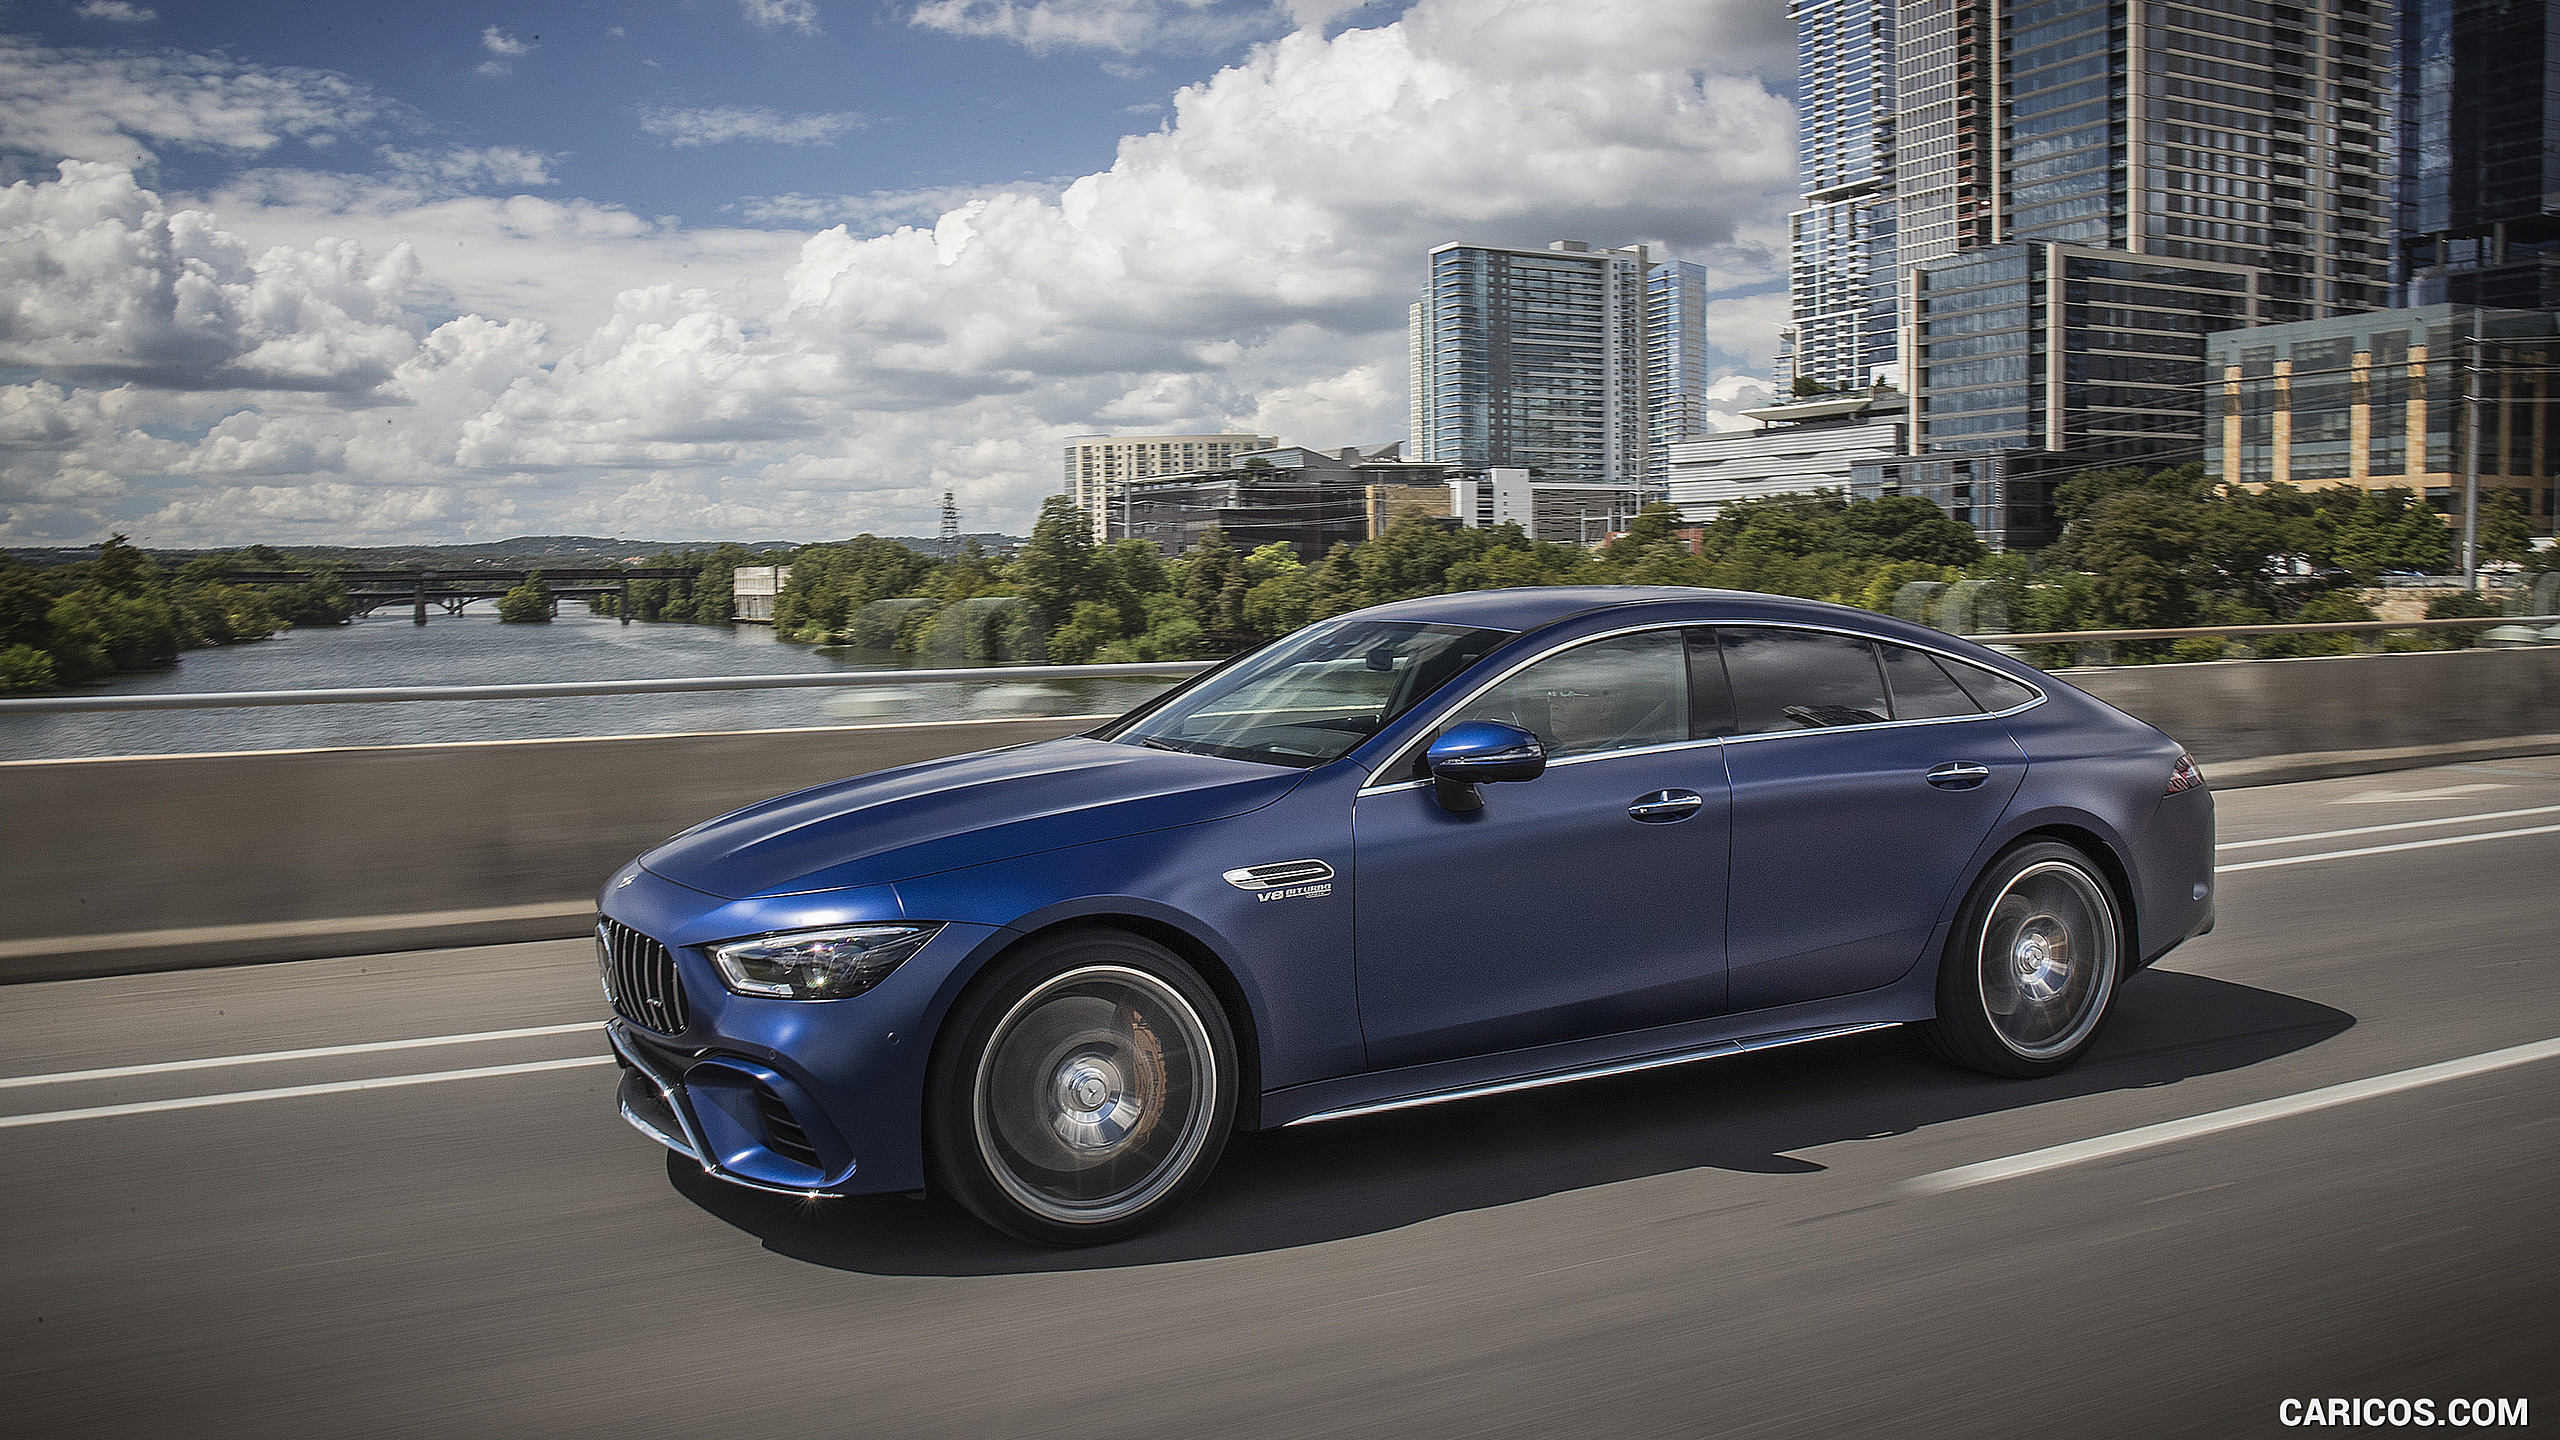 2019 Mercedes-AMG GT 63 S 4MATIC+ 4-Door Coupe - Front Three-Quarter, #112 of 427